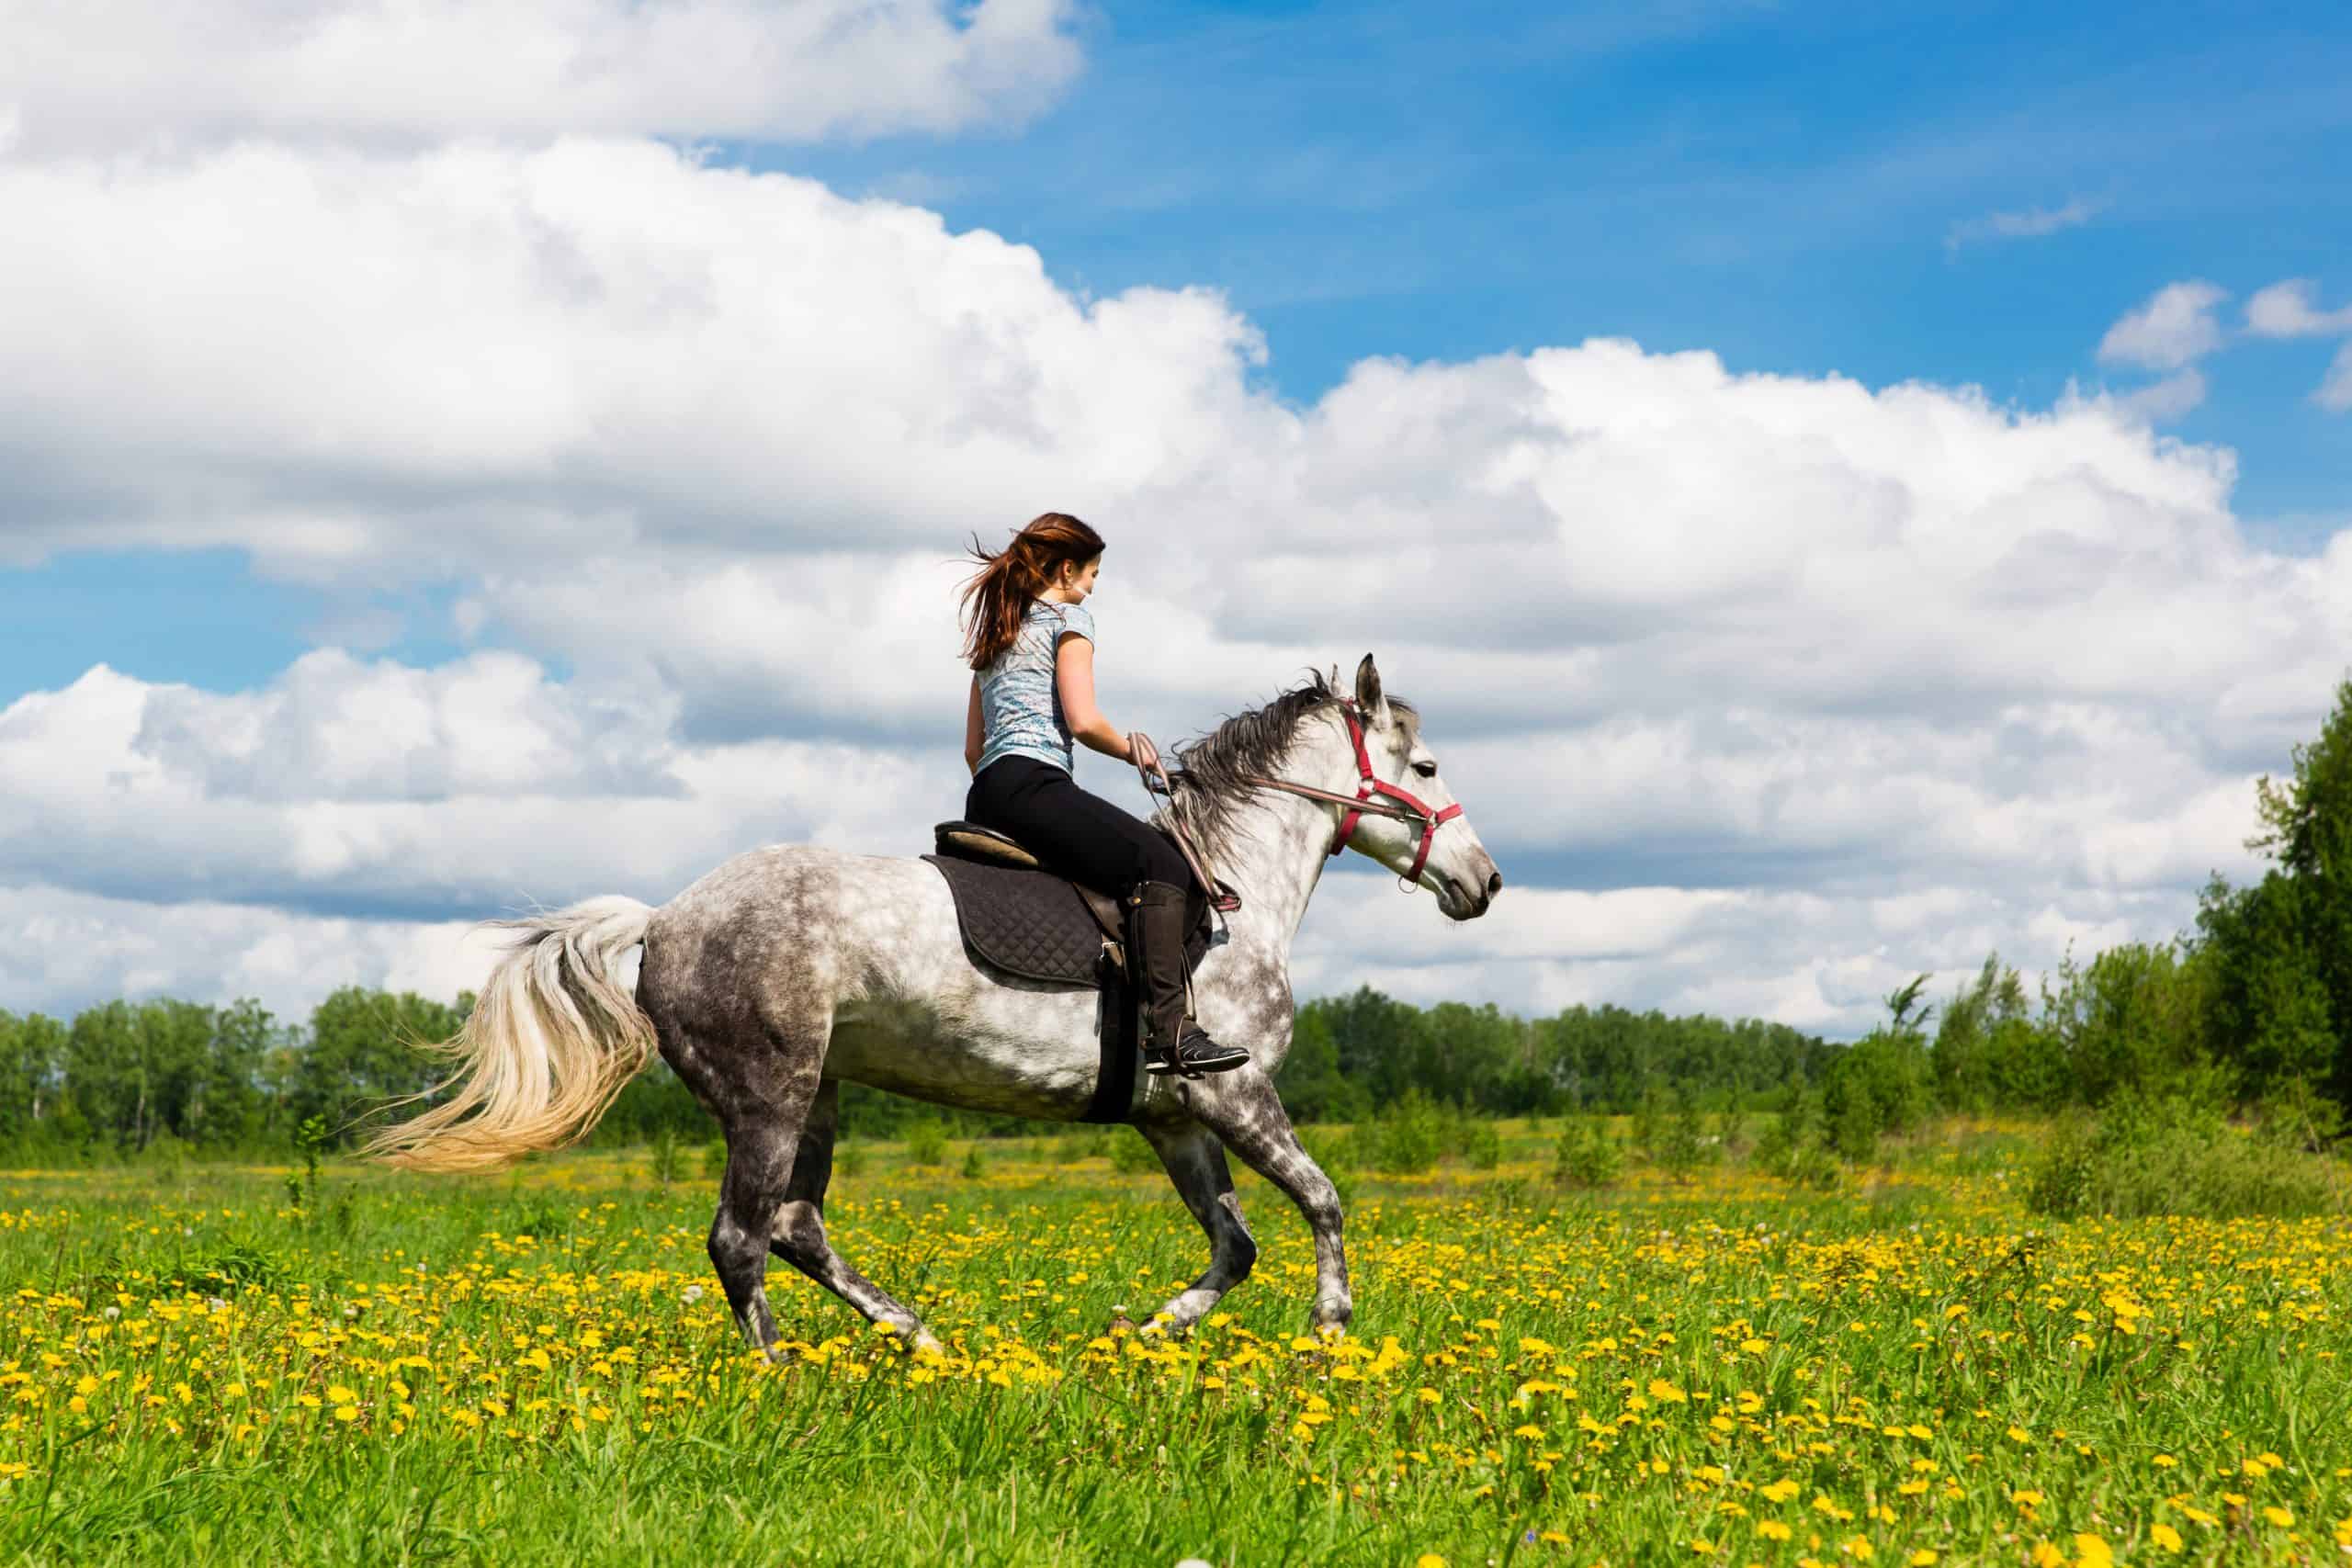 Woman riding on grey horse in the field